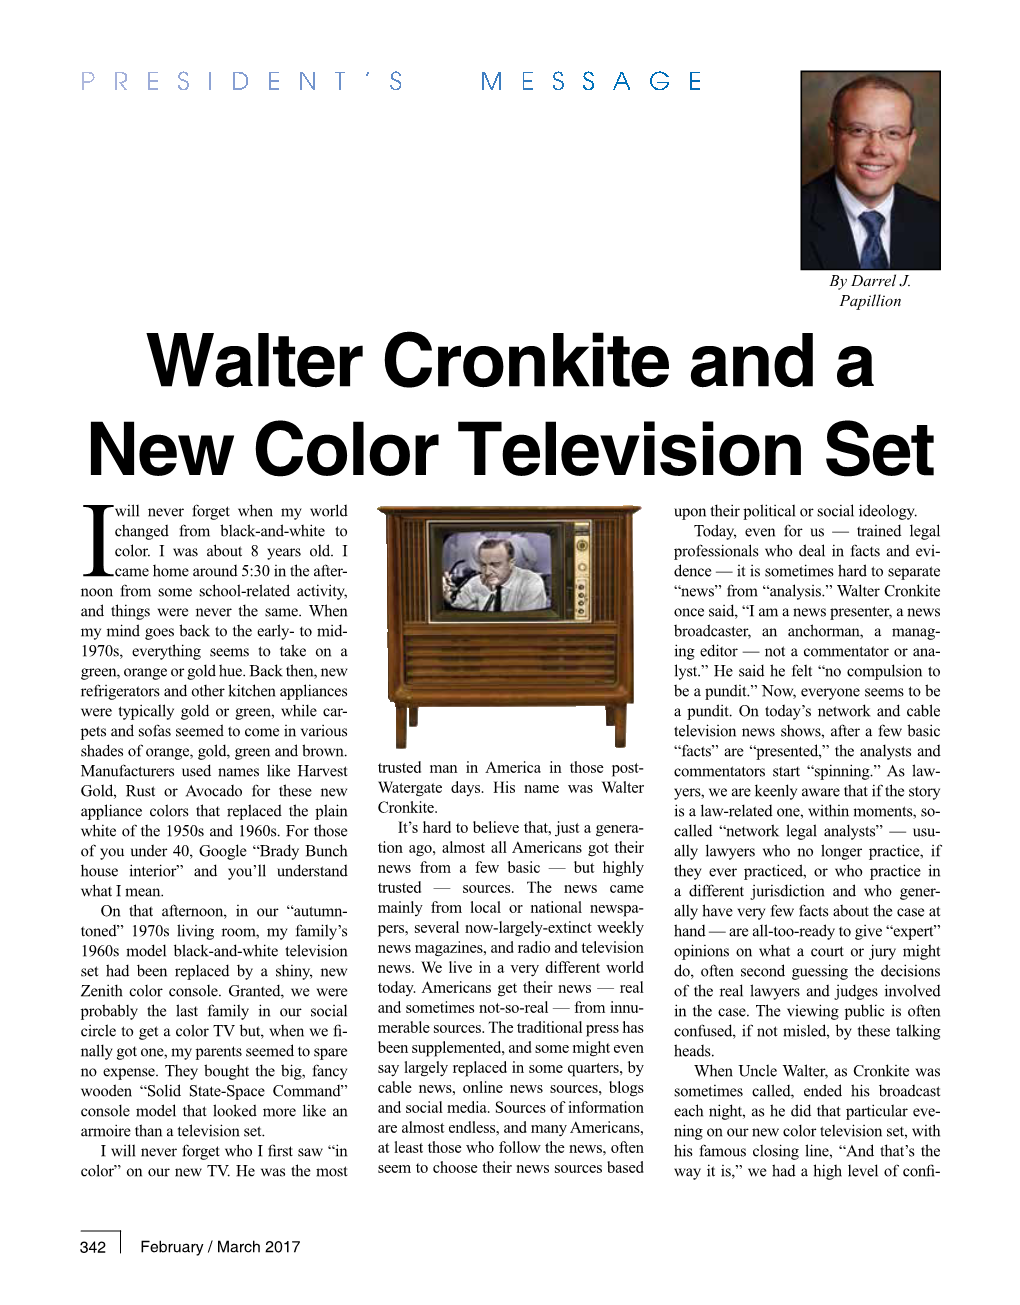 Walter Cronkite and a New Color Television Set Will Never Forget When My World Upon Their Political Or Social Ideology